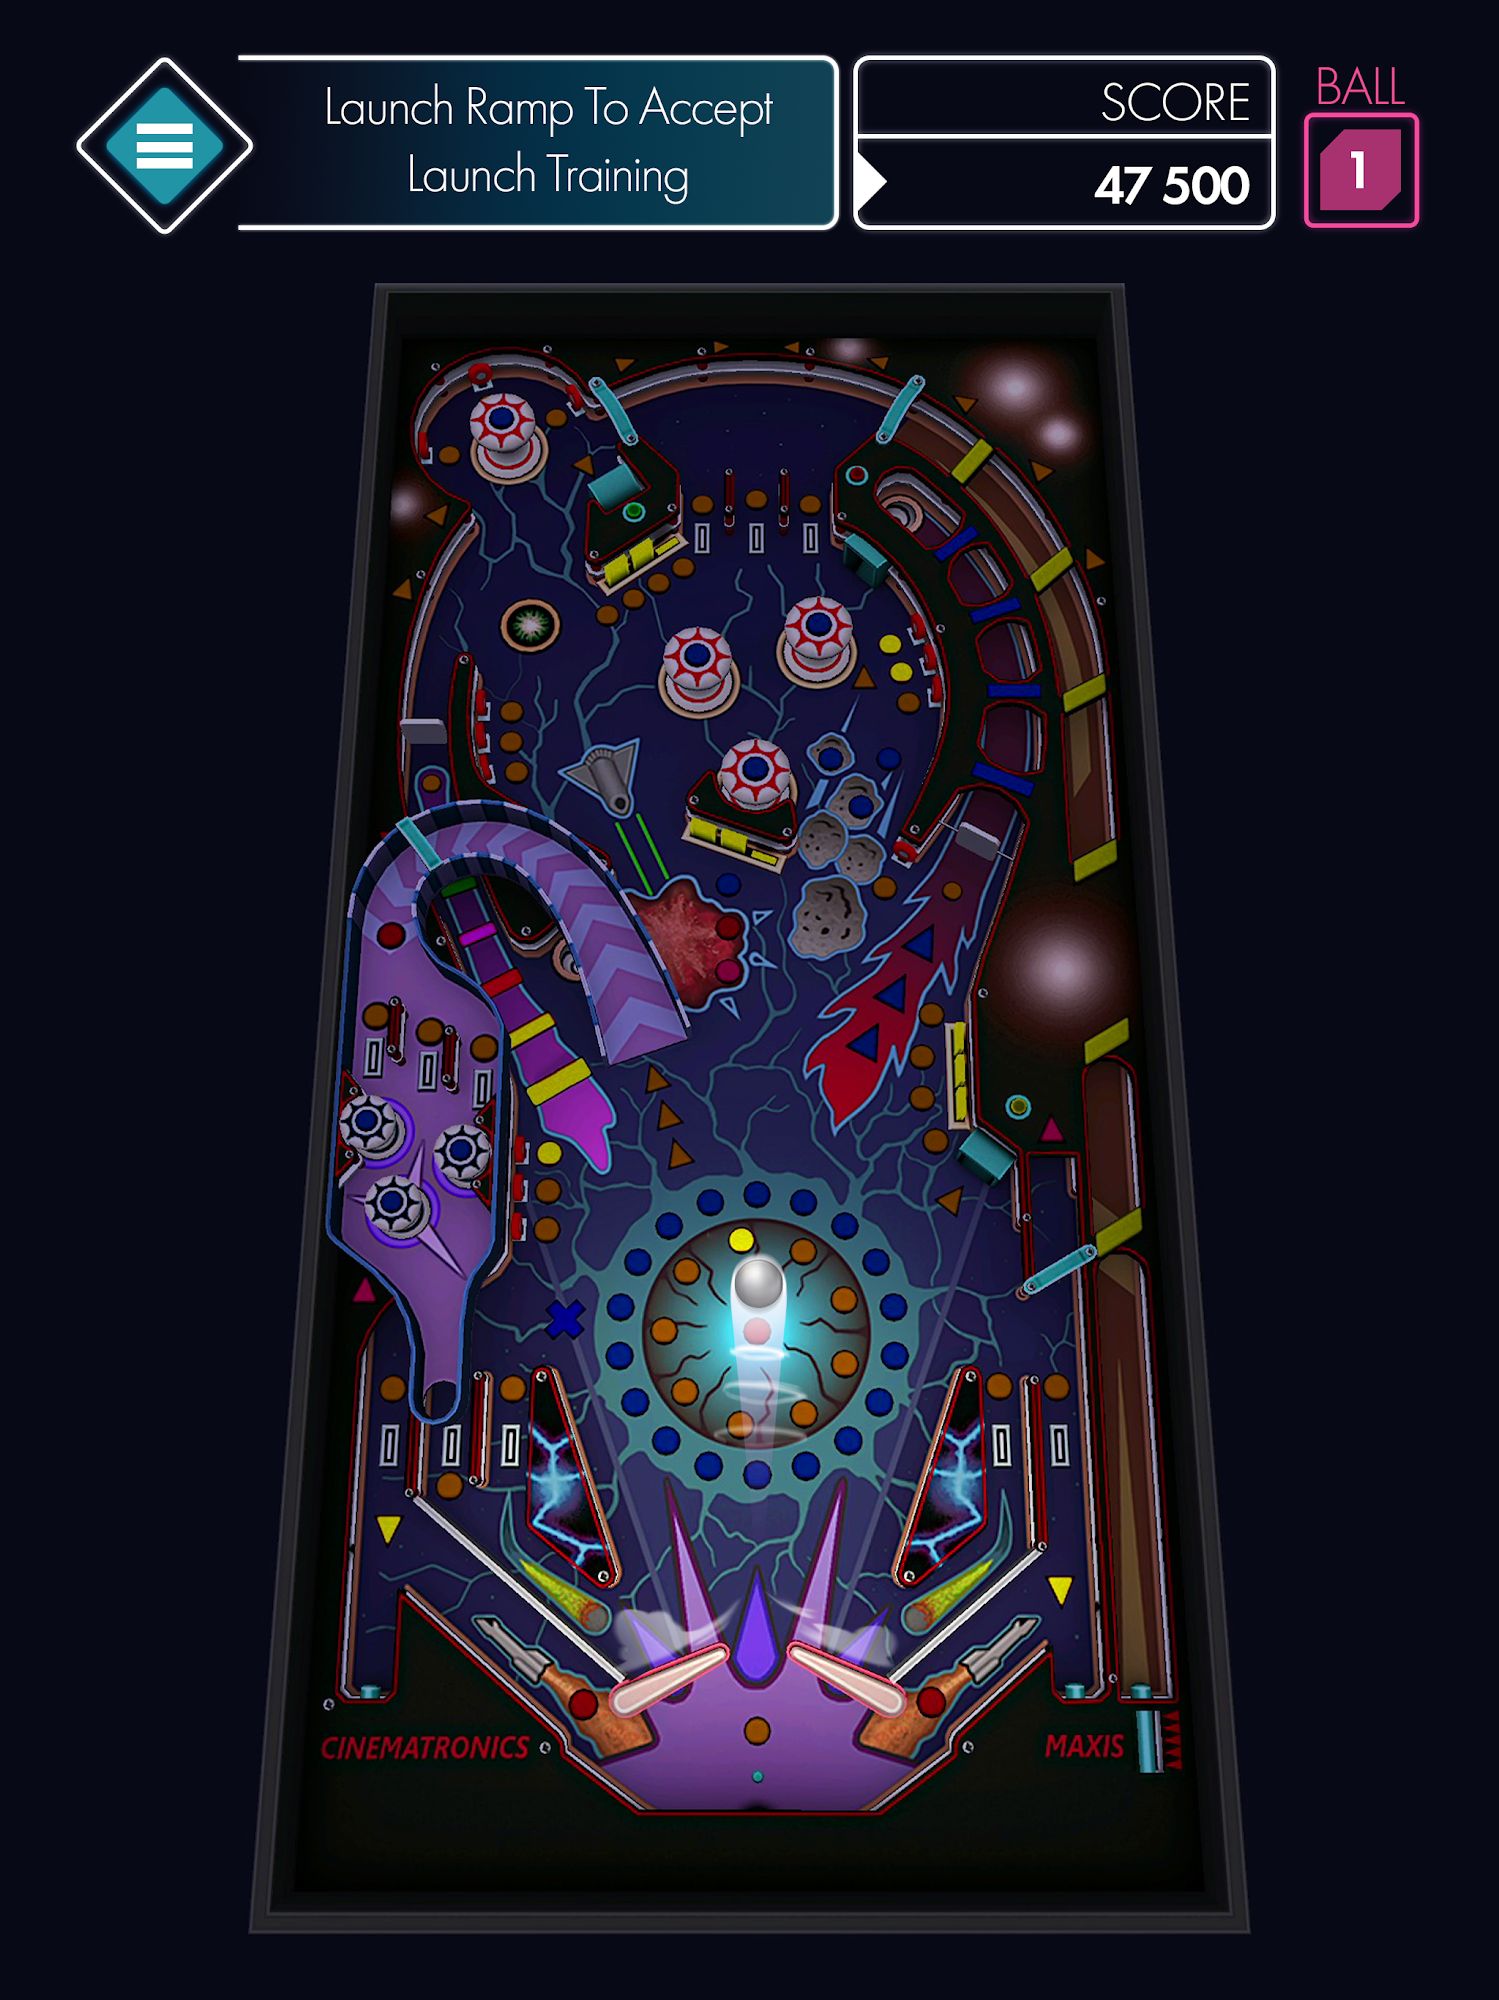 Download Space Pinball: Classic game für Android kostenlos.